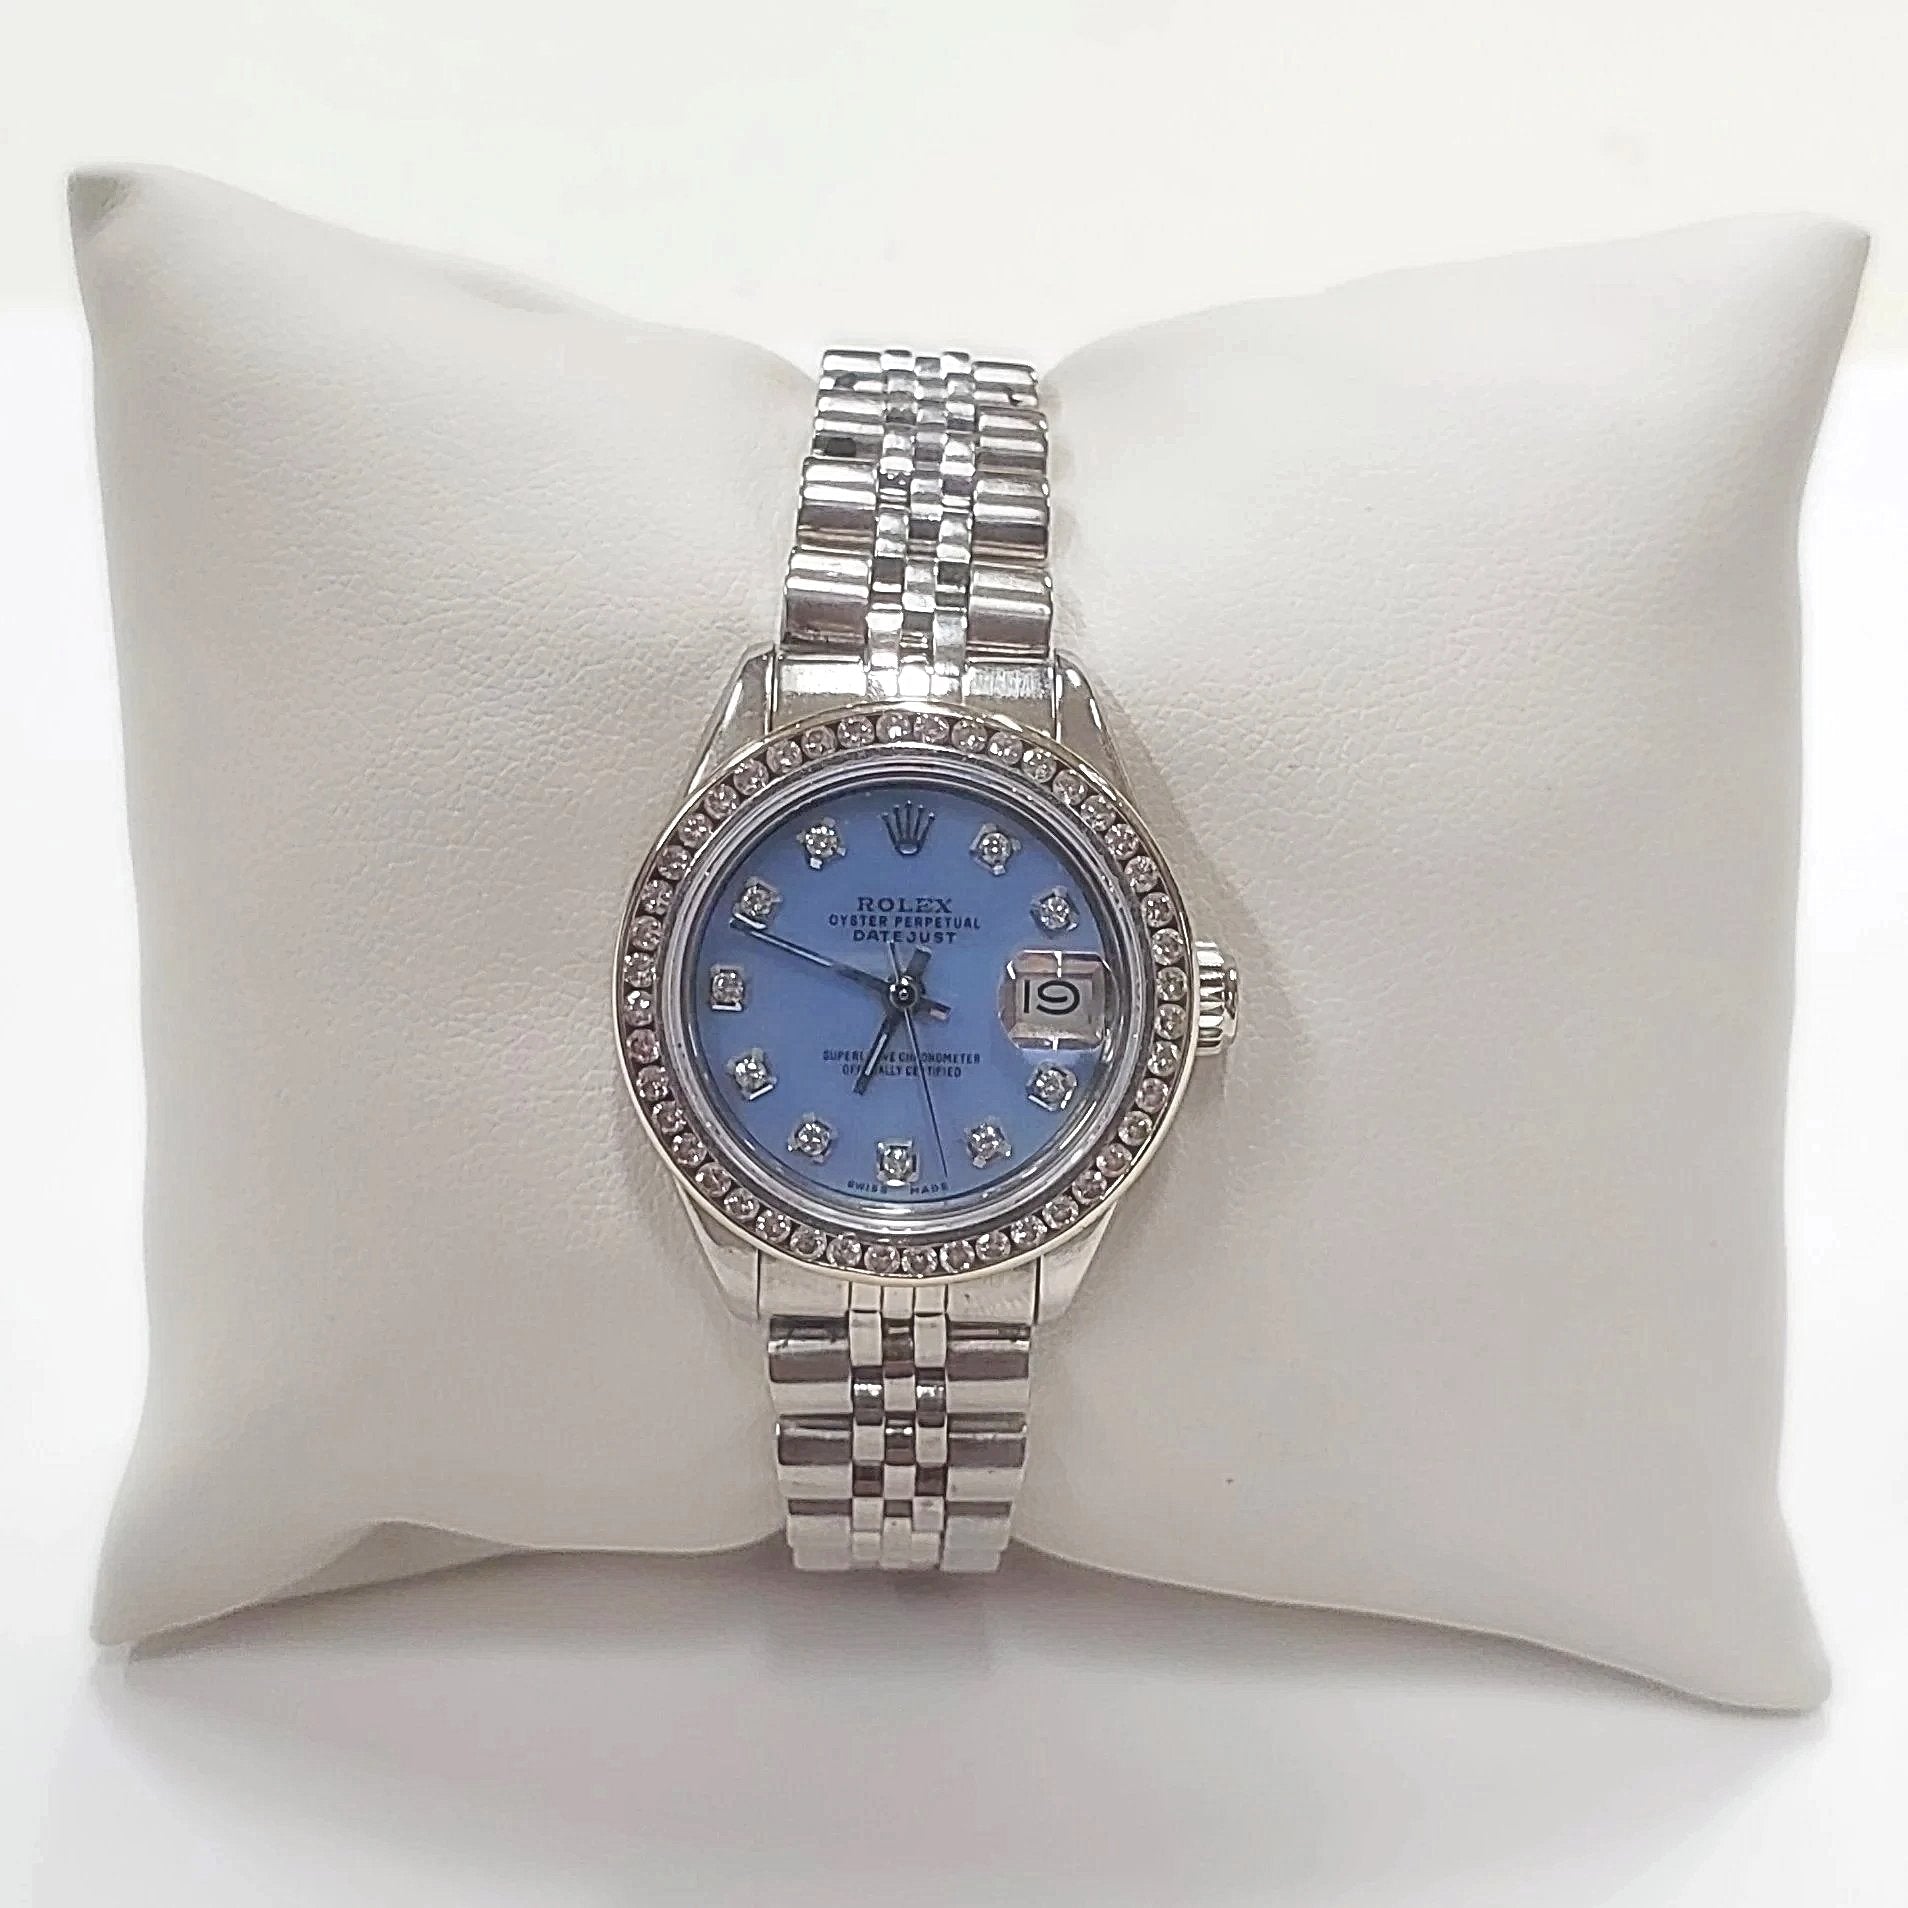 Ladies Rolex 26mm DateJust Stainless Steel Watch with Powder Blue Diamond Dial and Diamond Bezel. (Pre-Owned)